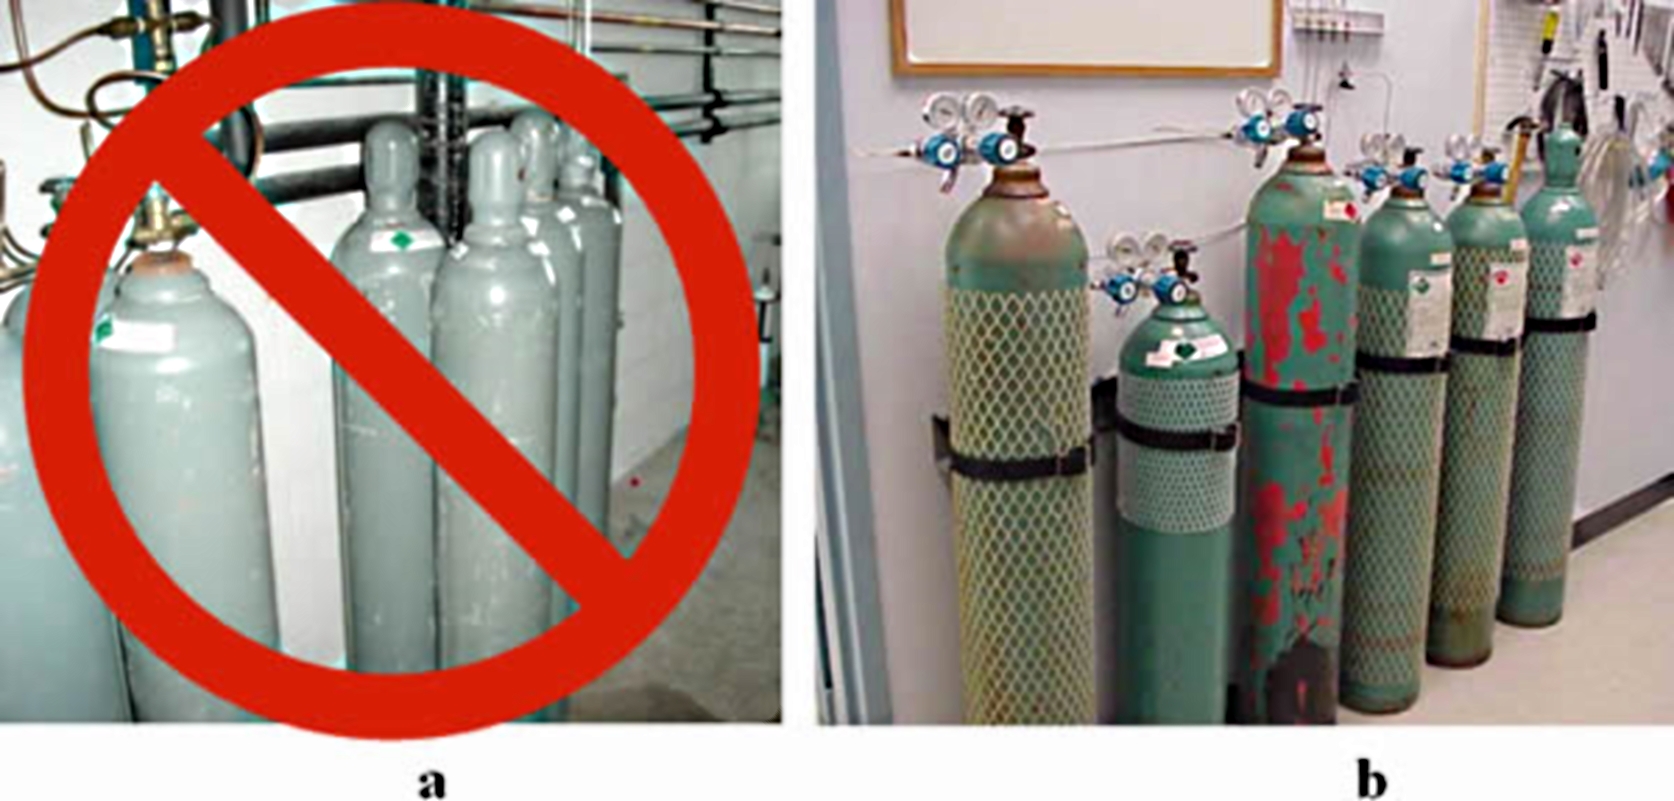 Two photographs comparing how gas cylinders should be stored safely.